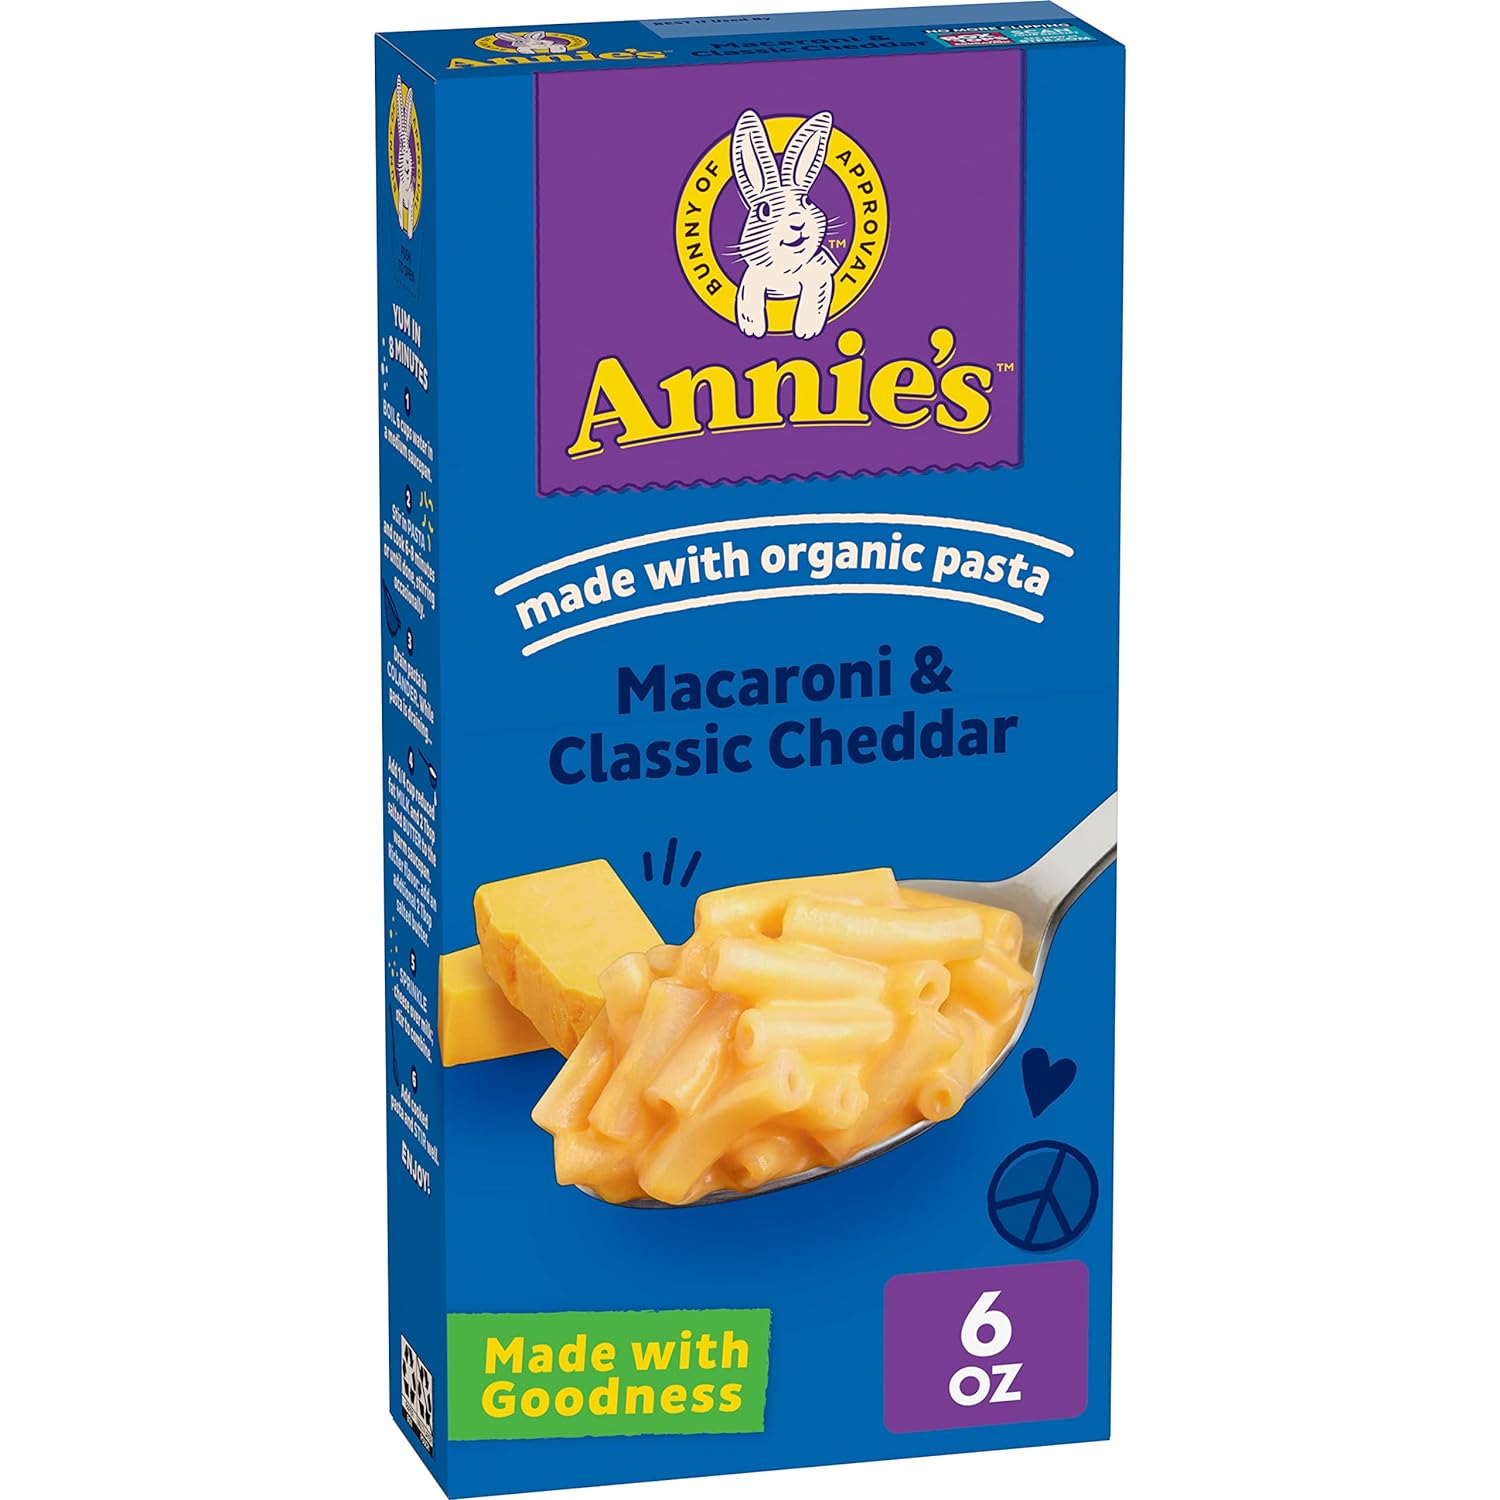 Annie’s Classic Cheddar Macaroni and Cheese Dinner with Organic Pasta,4 Ounces